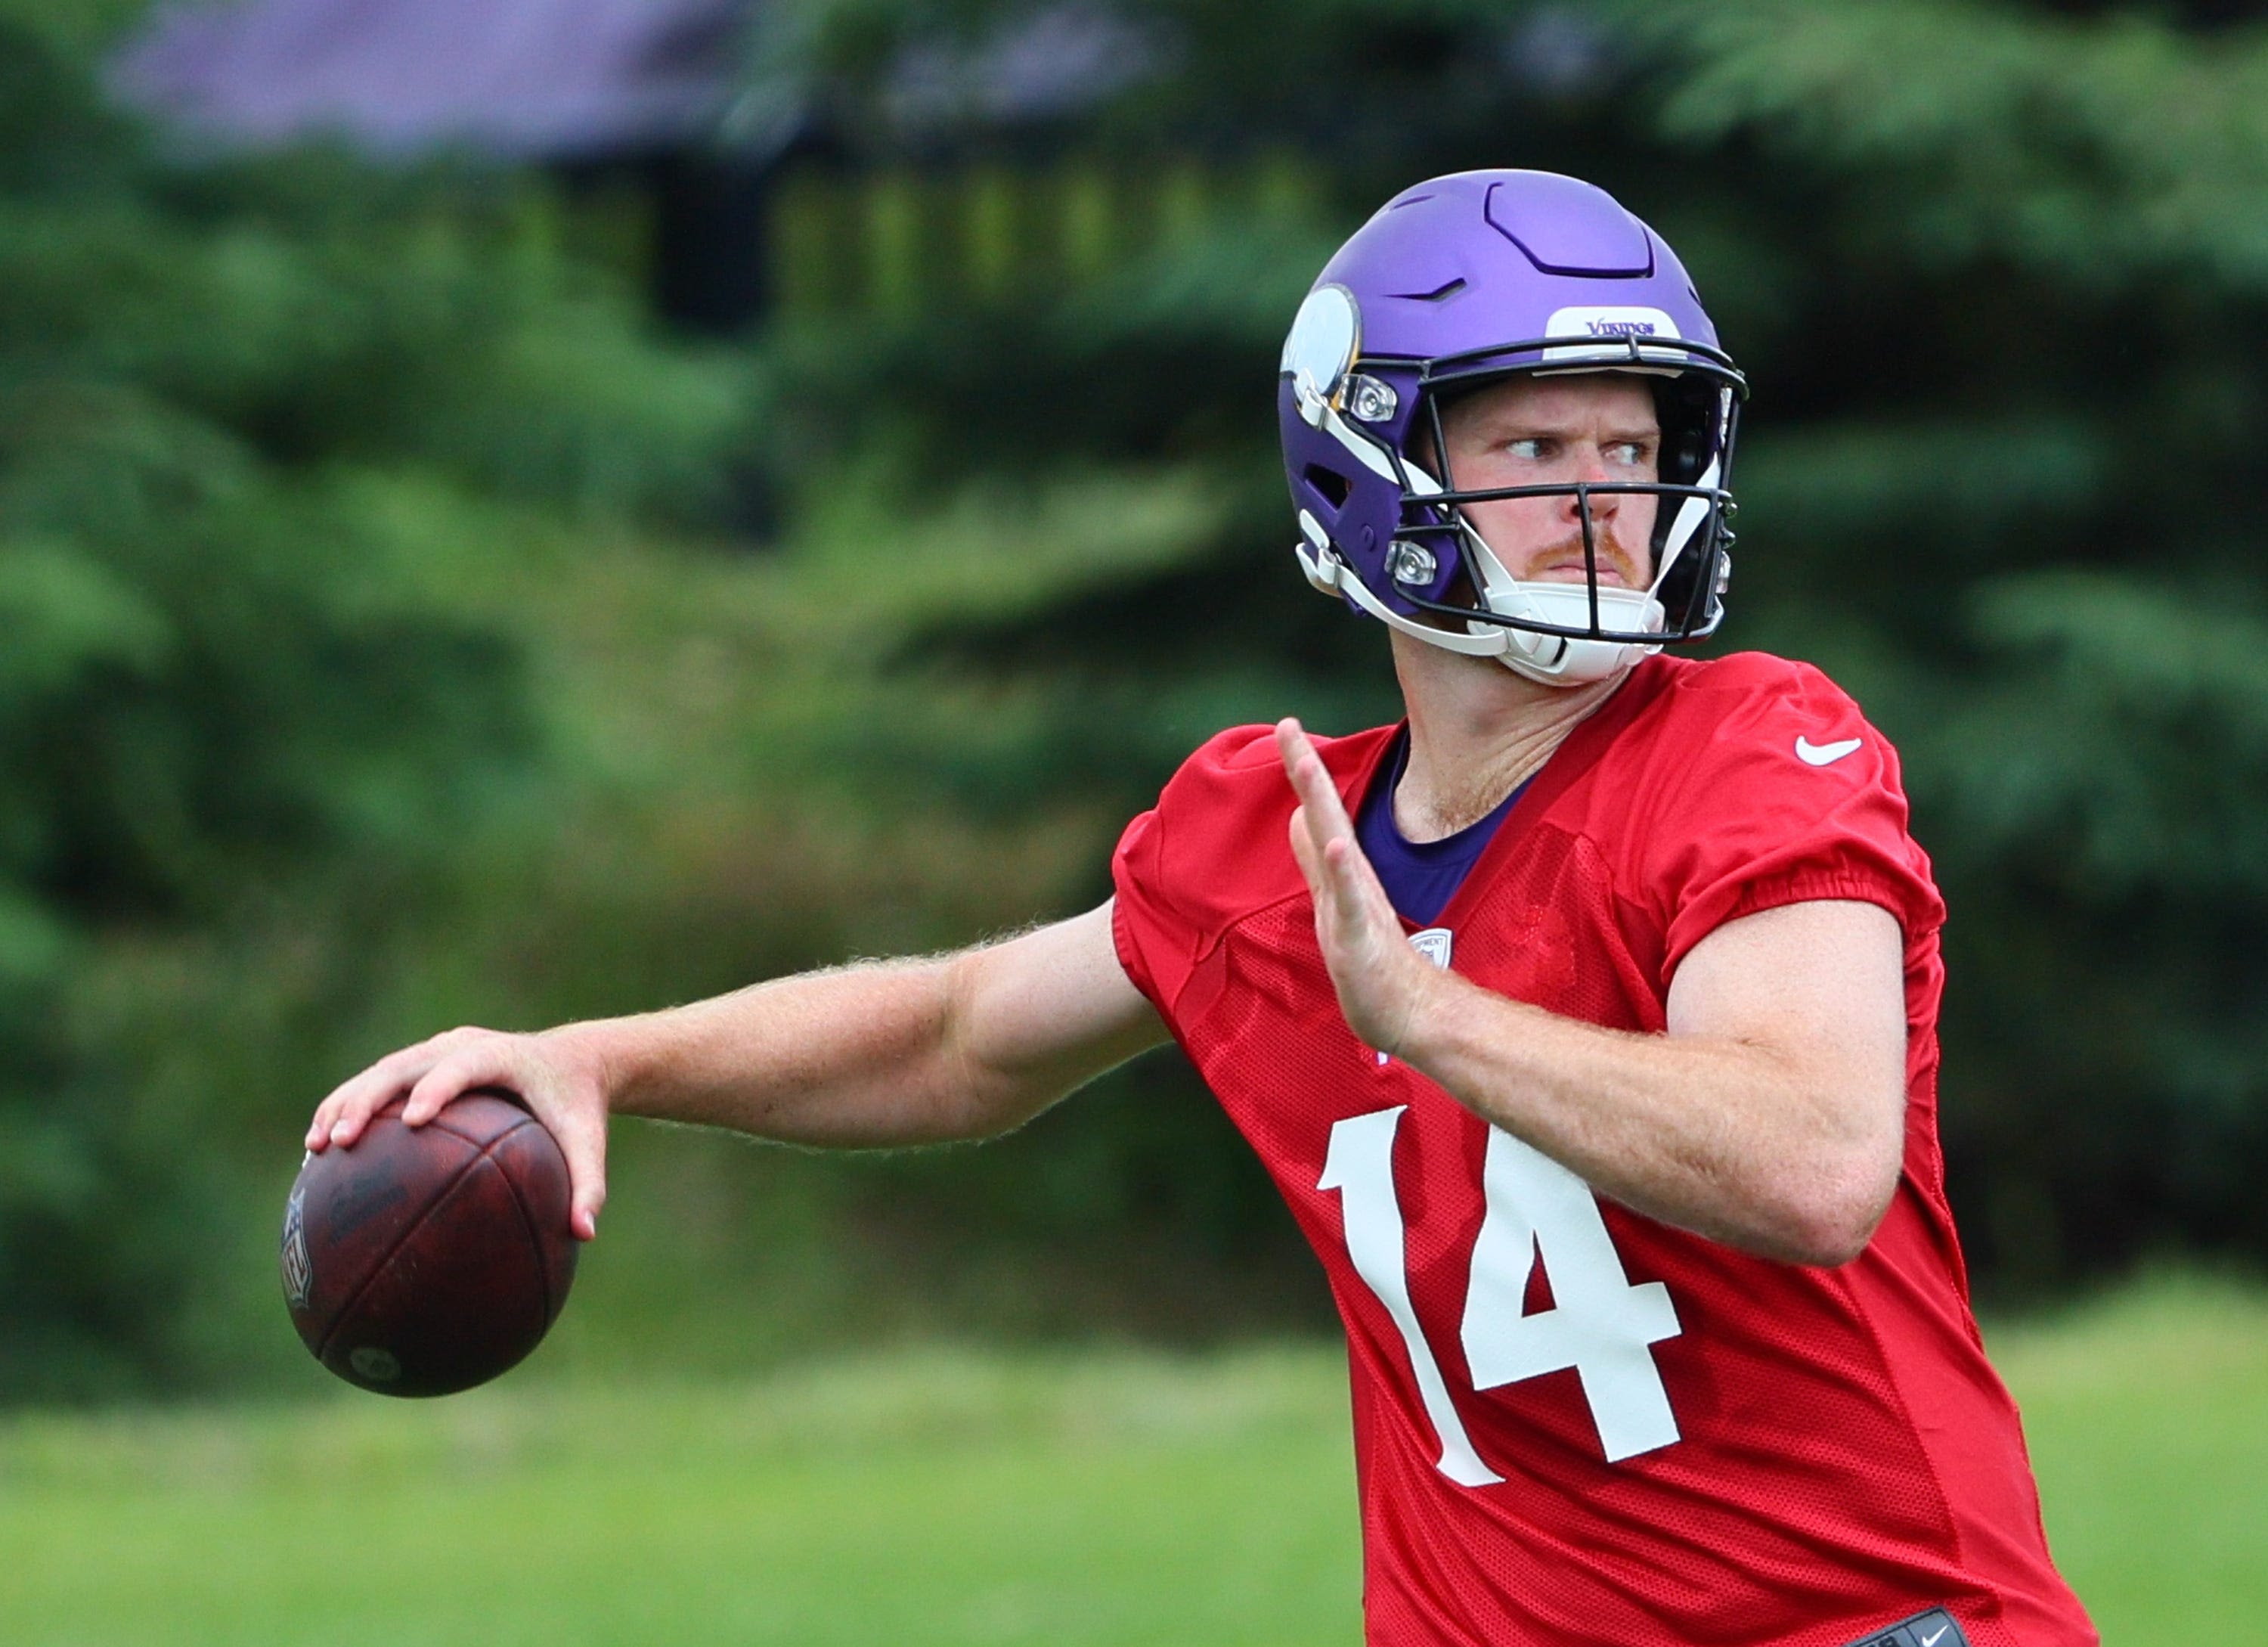 Sights and sounds from Week 2 of Vikings training camp